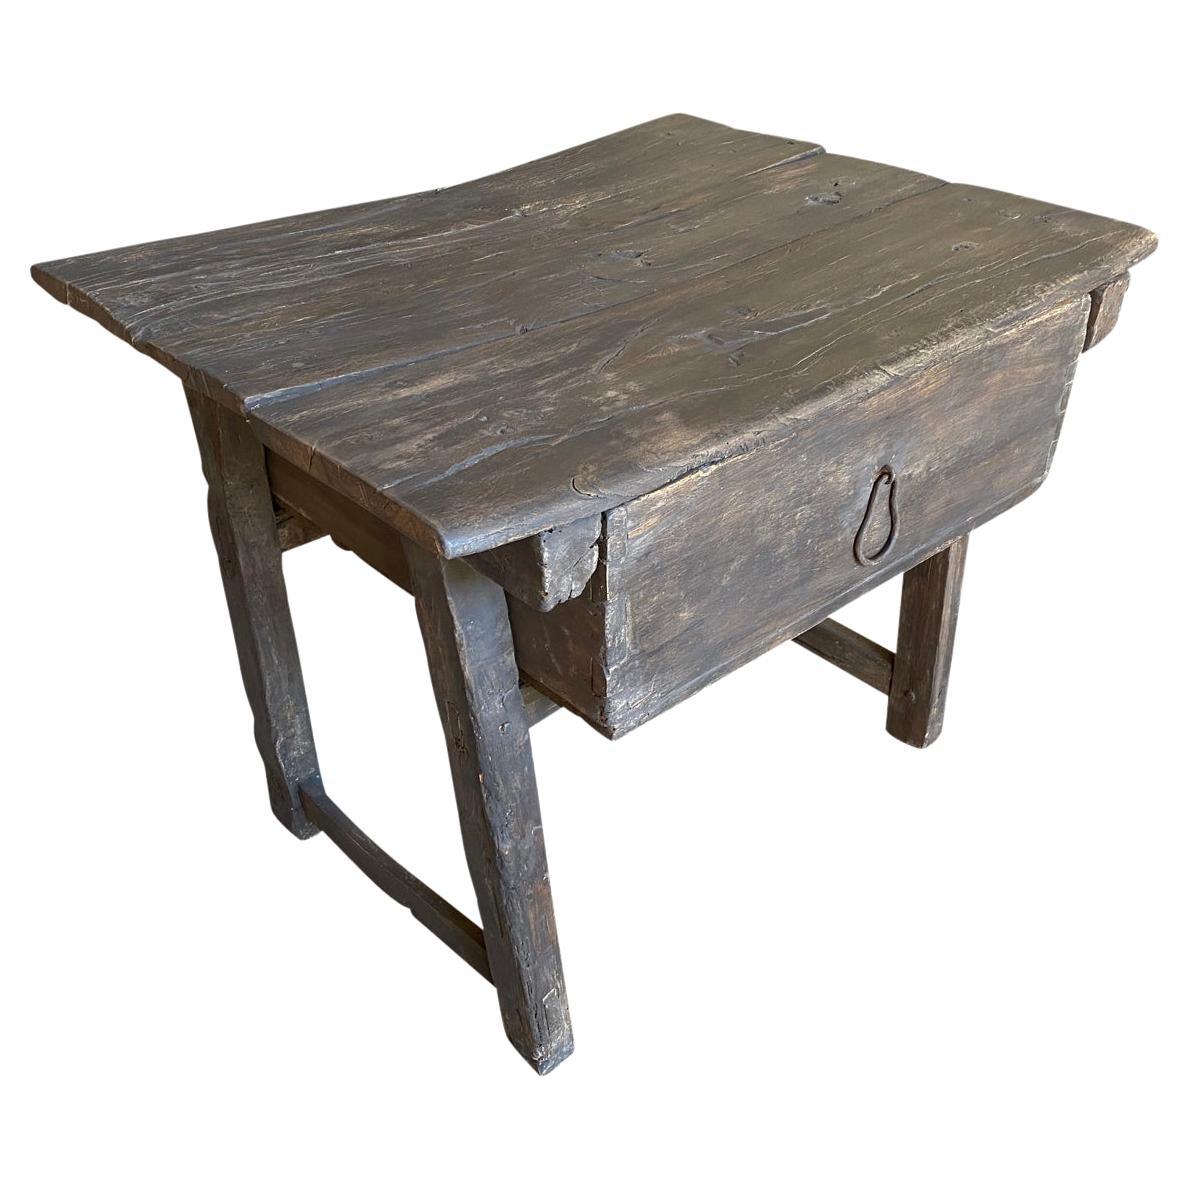 A very charming and rustic Side Table from Portugal. Soundly constructed from olive, chestnut and poplar with a single drawer. Handsome patina.